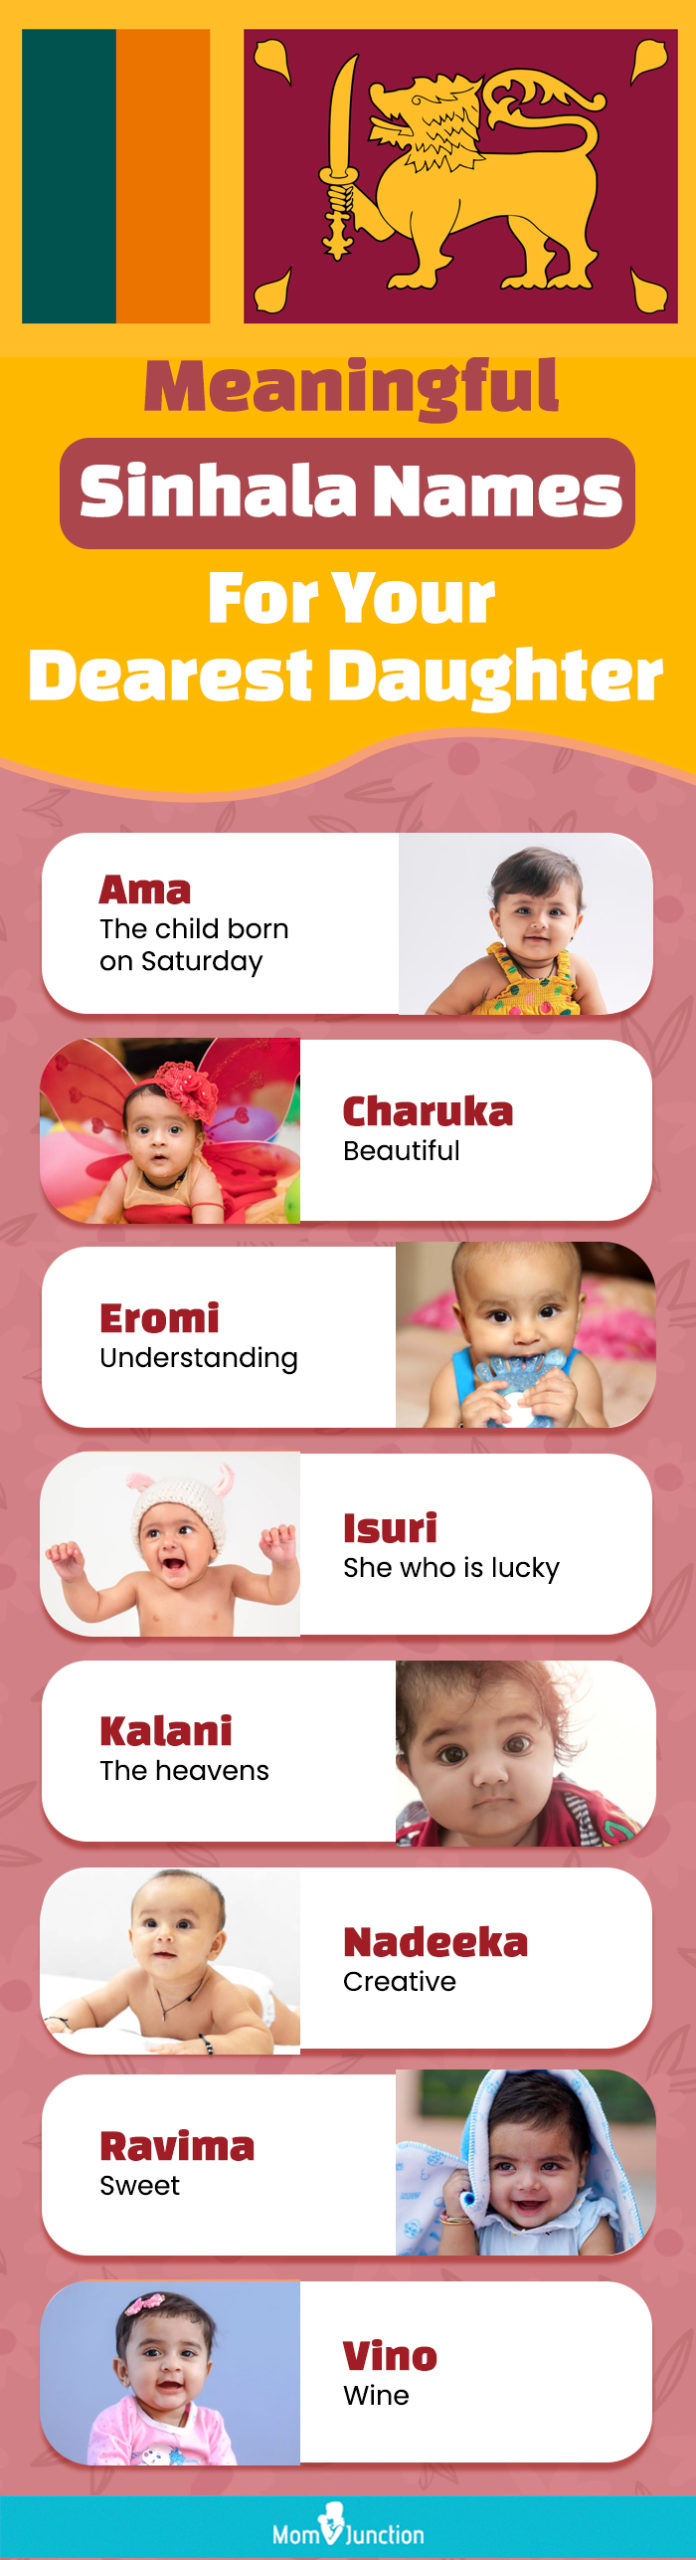 meaningful sinhala names for your dearest daughter (infographic)